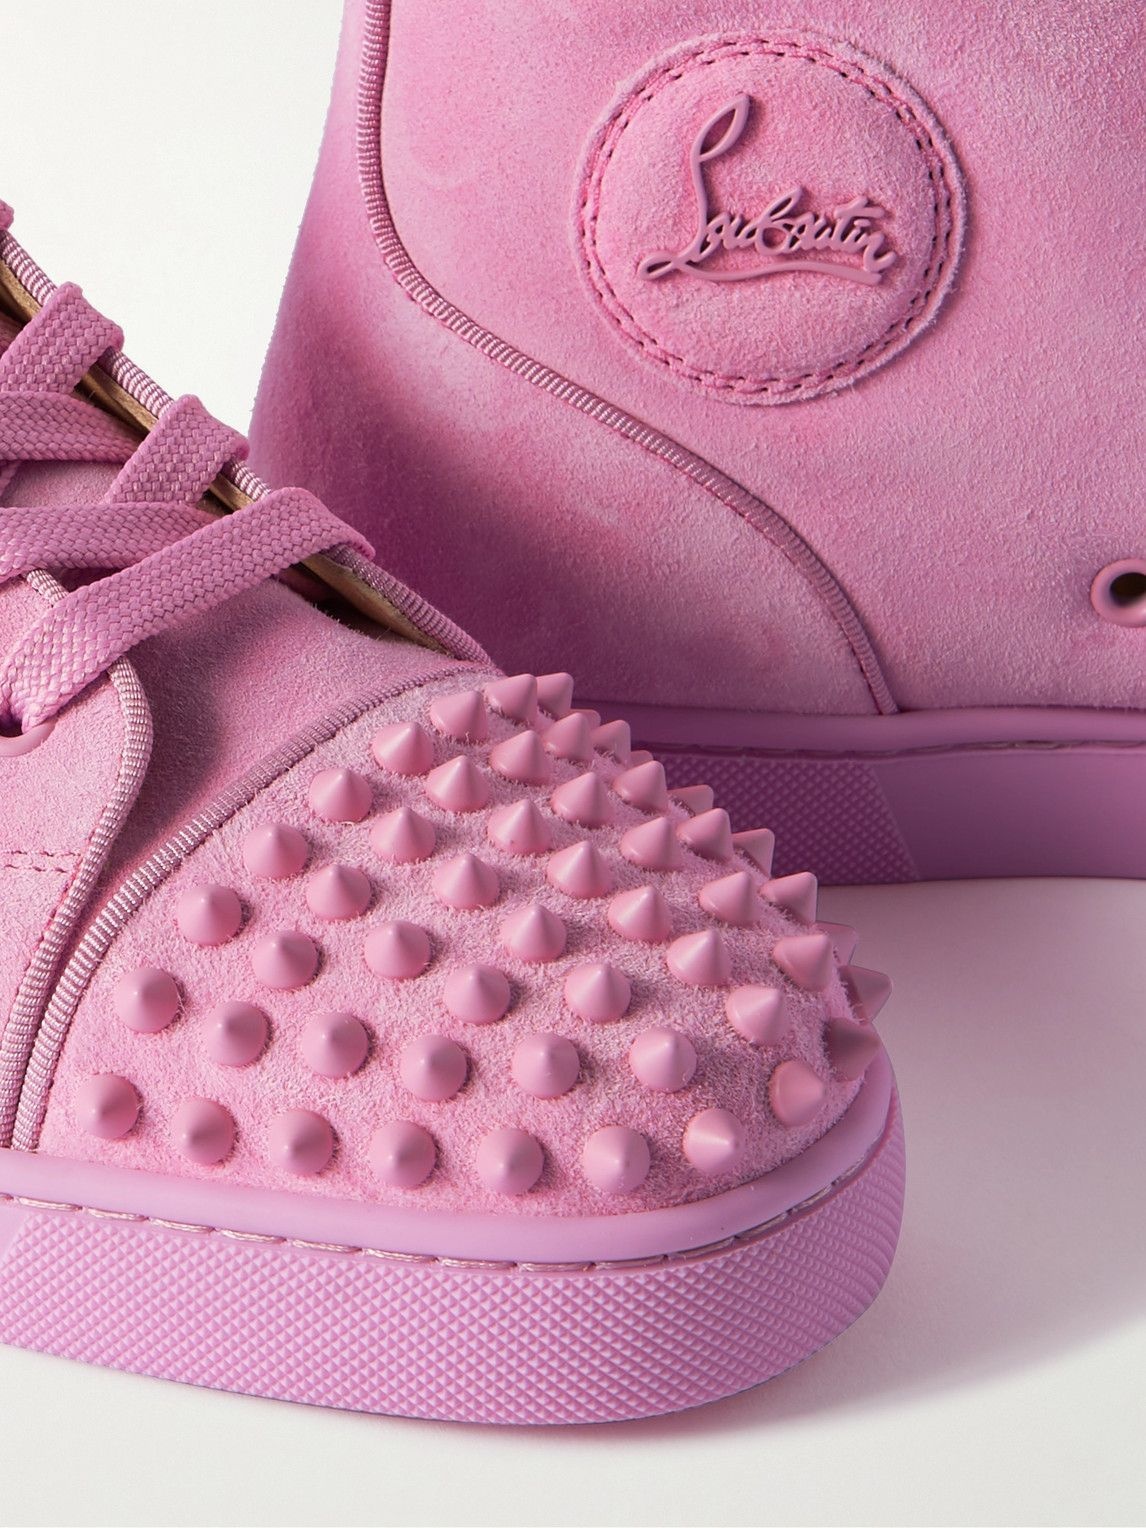 Christian Louboutin Light Pink Suede Louis Junior Spikes Sneakers Size 41